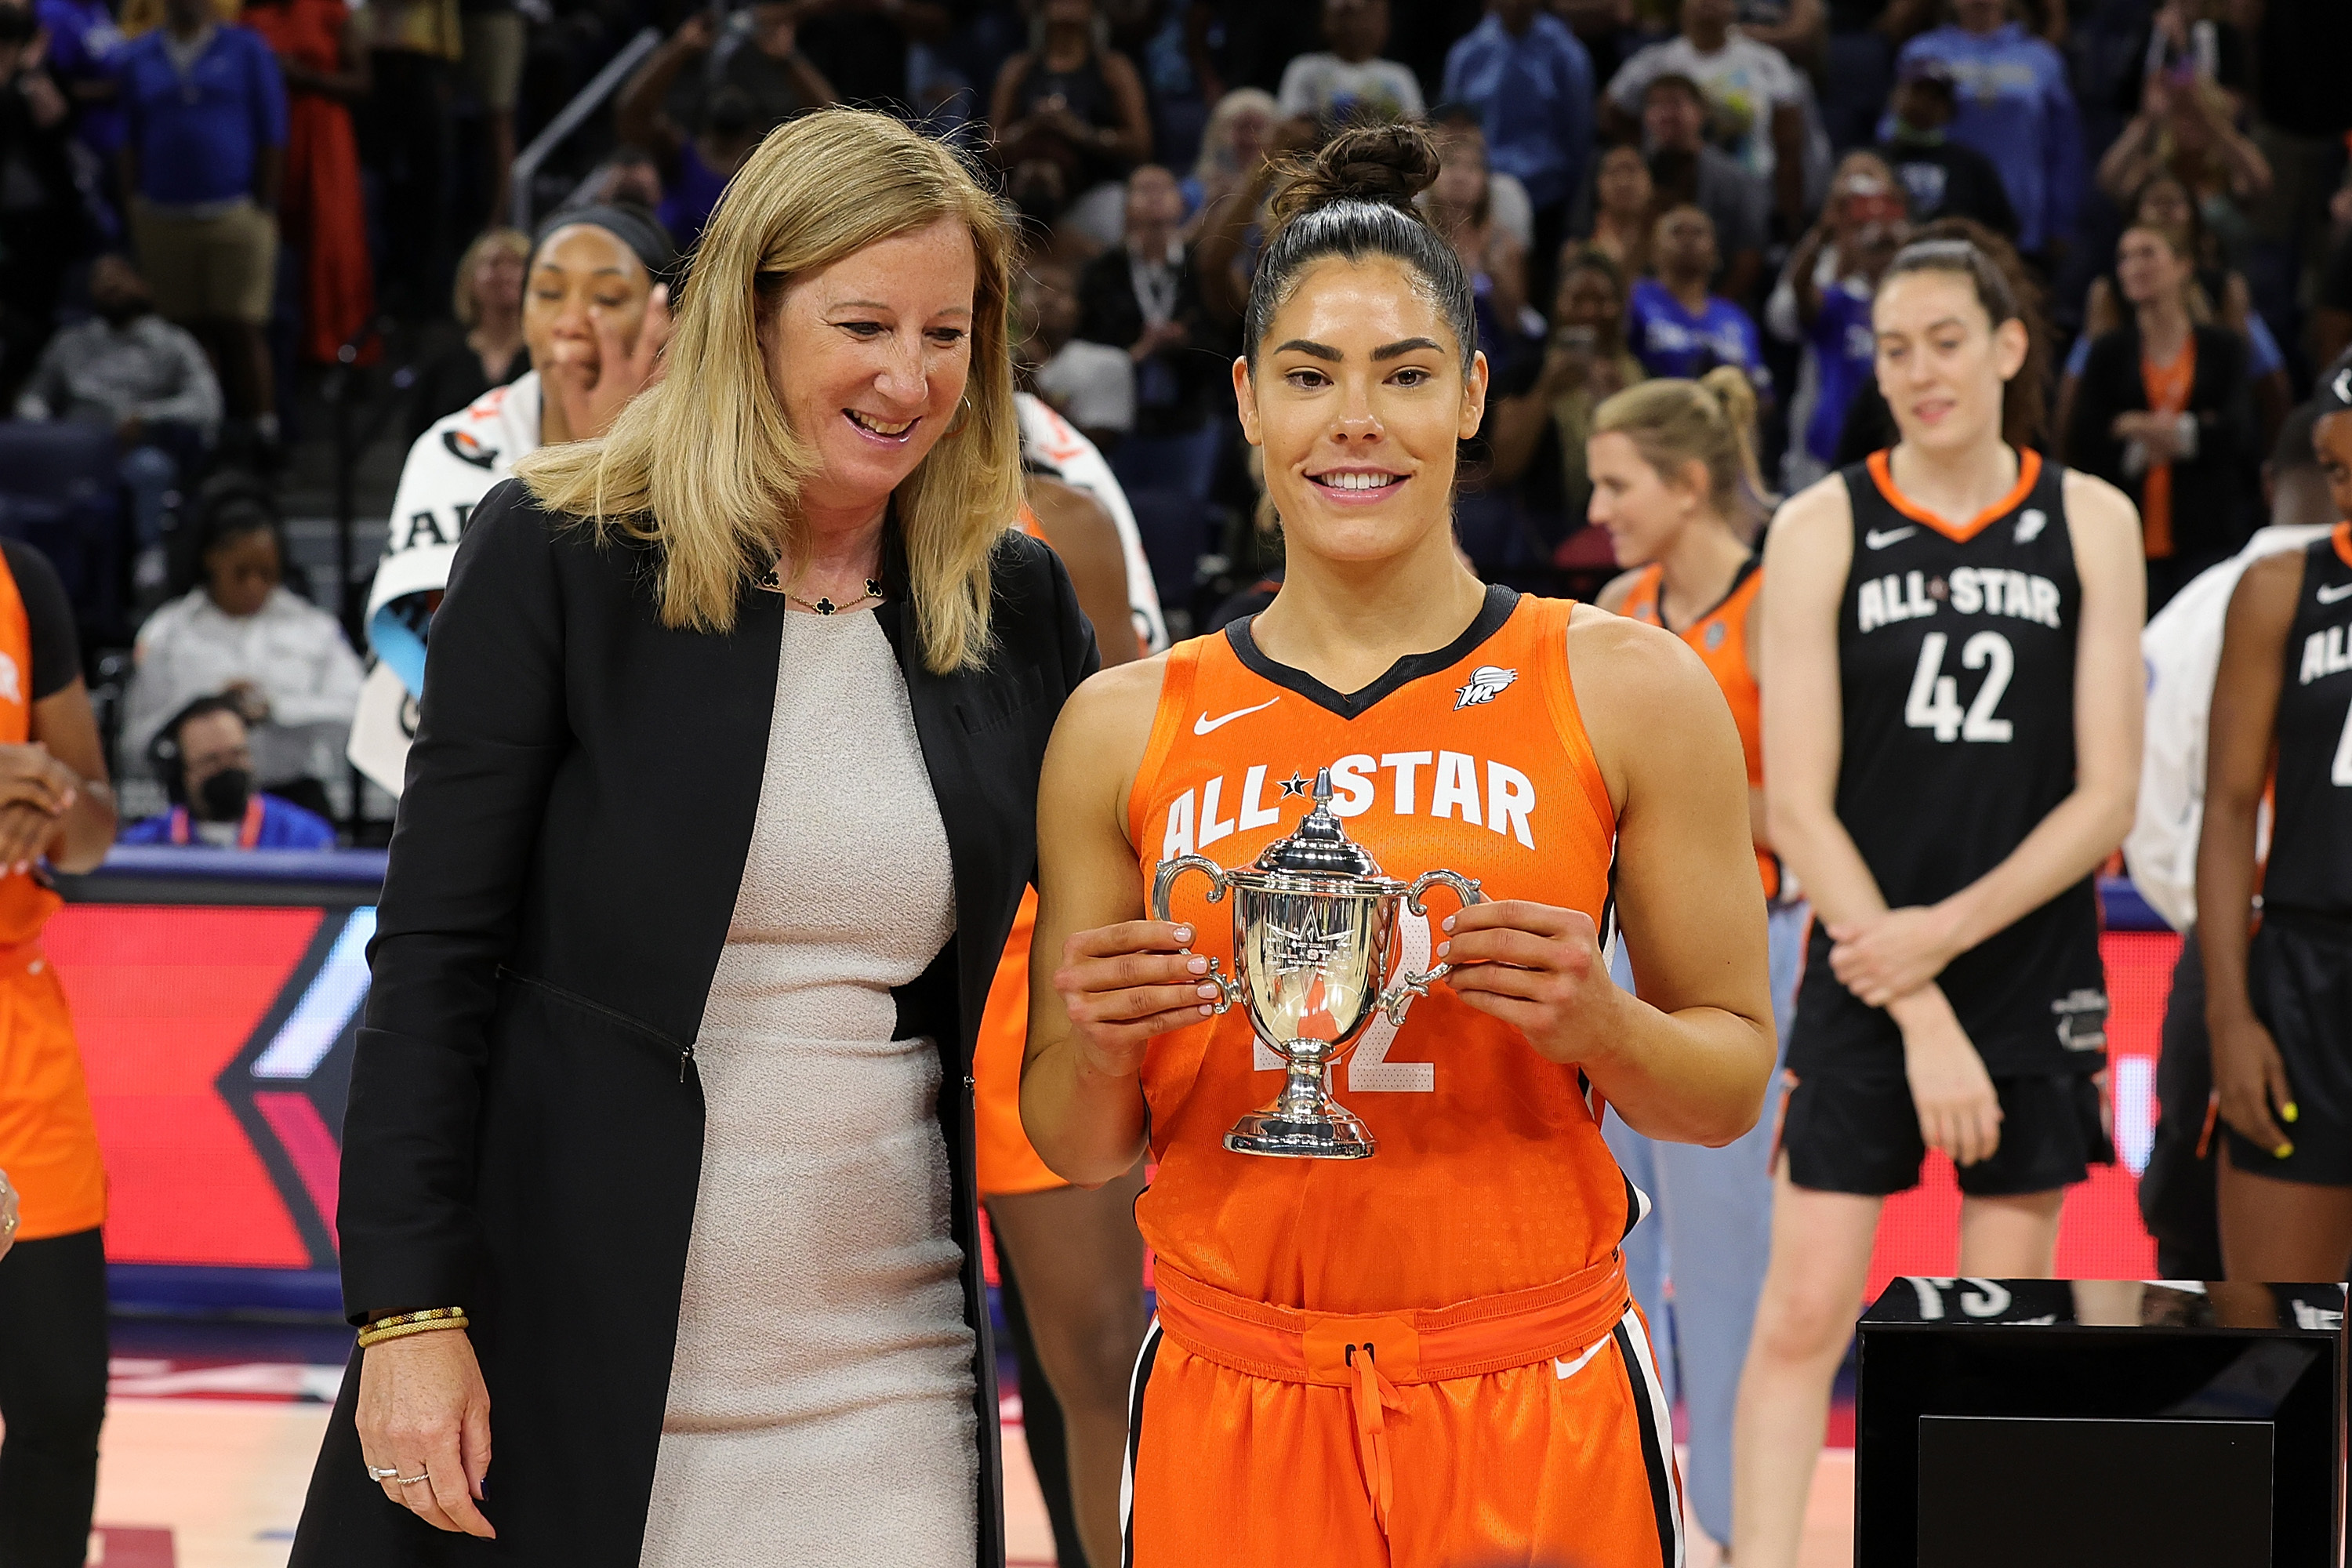 Did WNBA MVP Kelsey Plum Receive a Trophy That Cost Only 18?